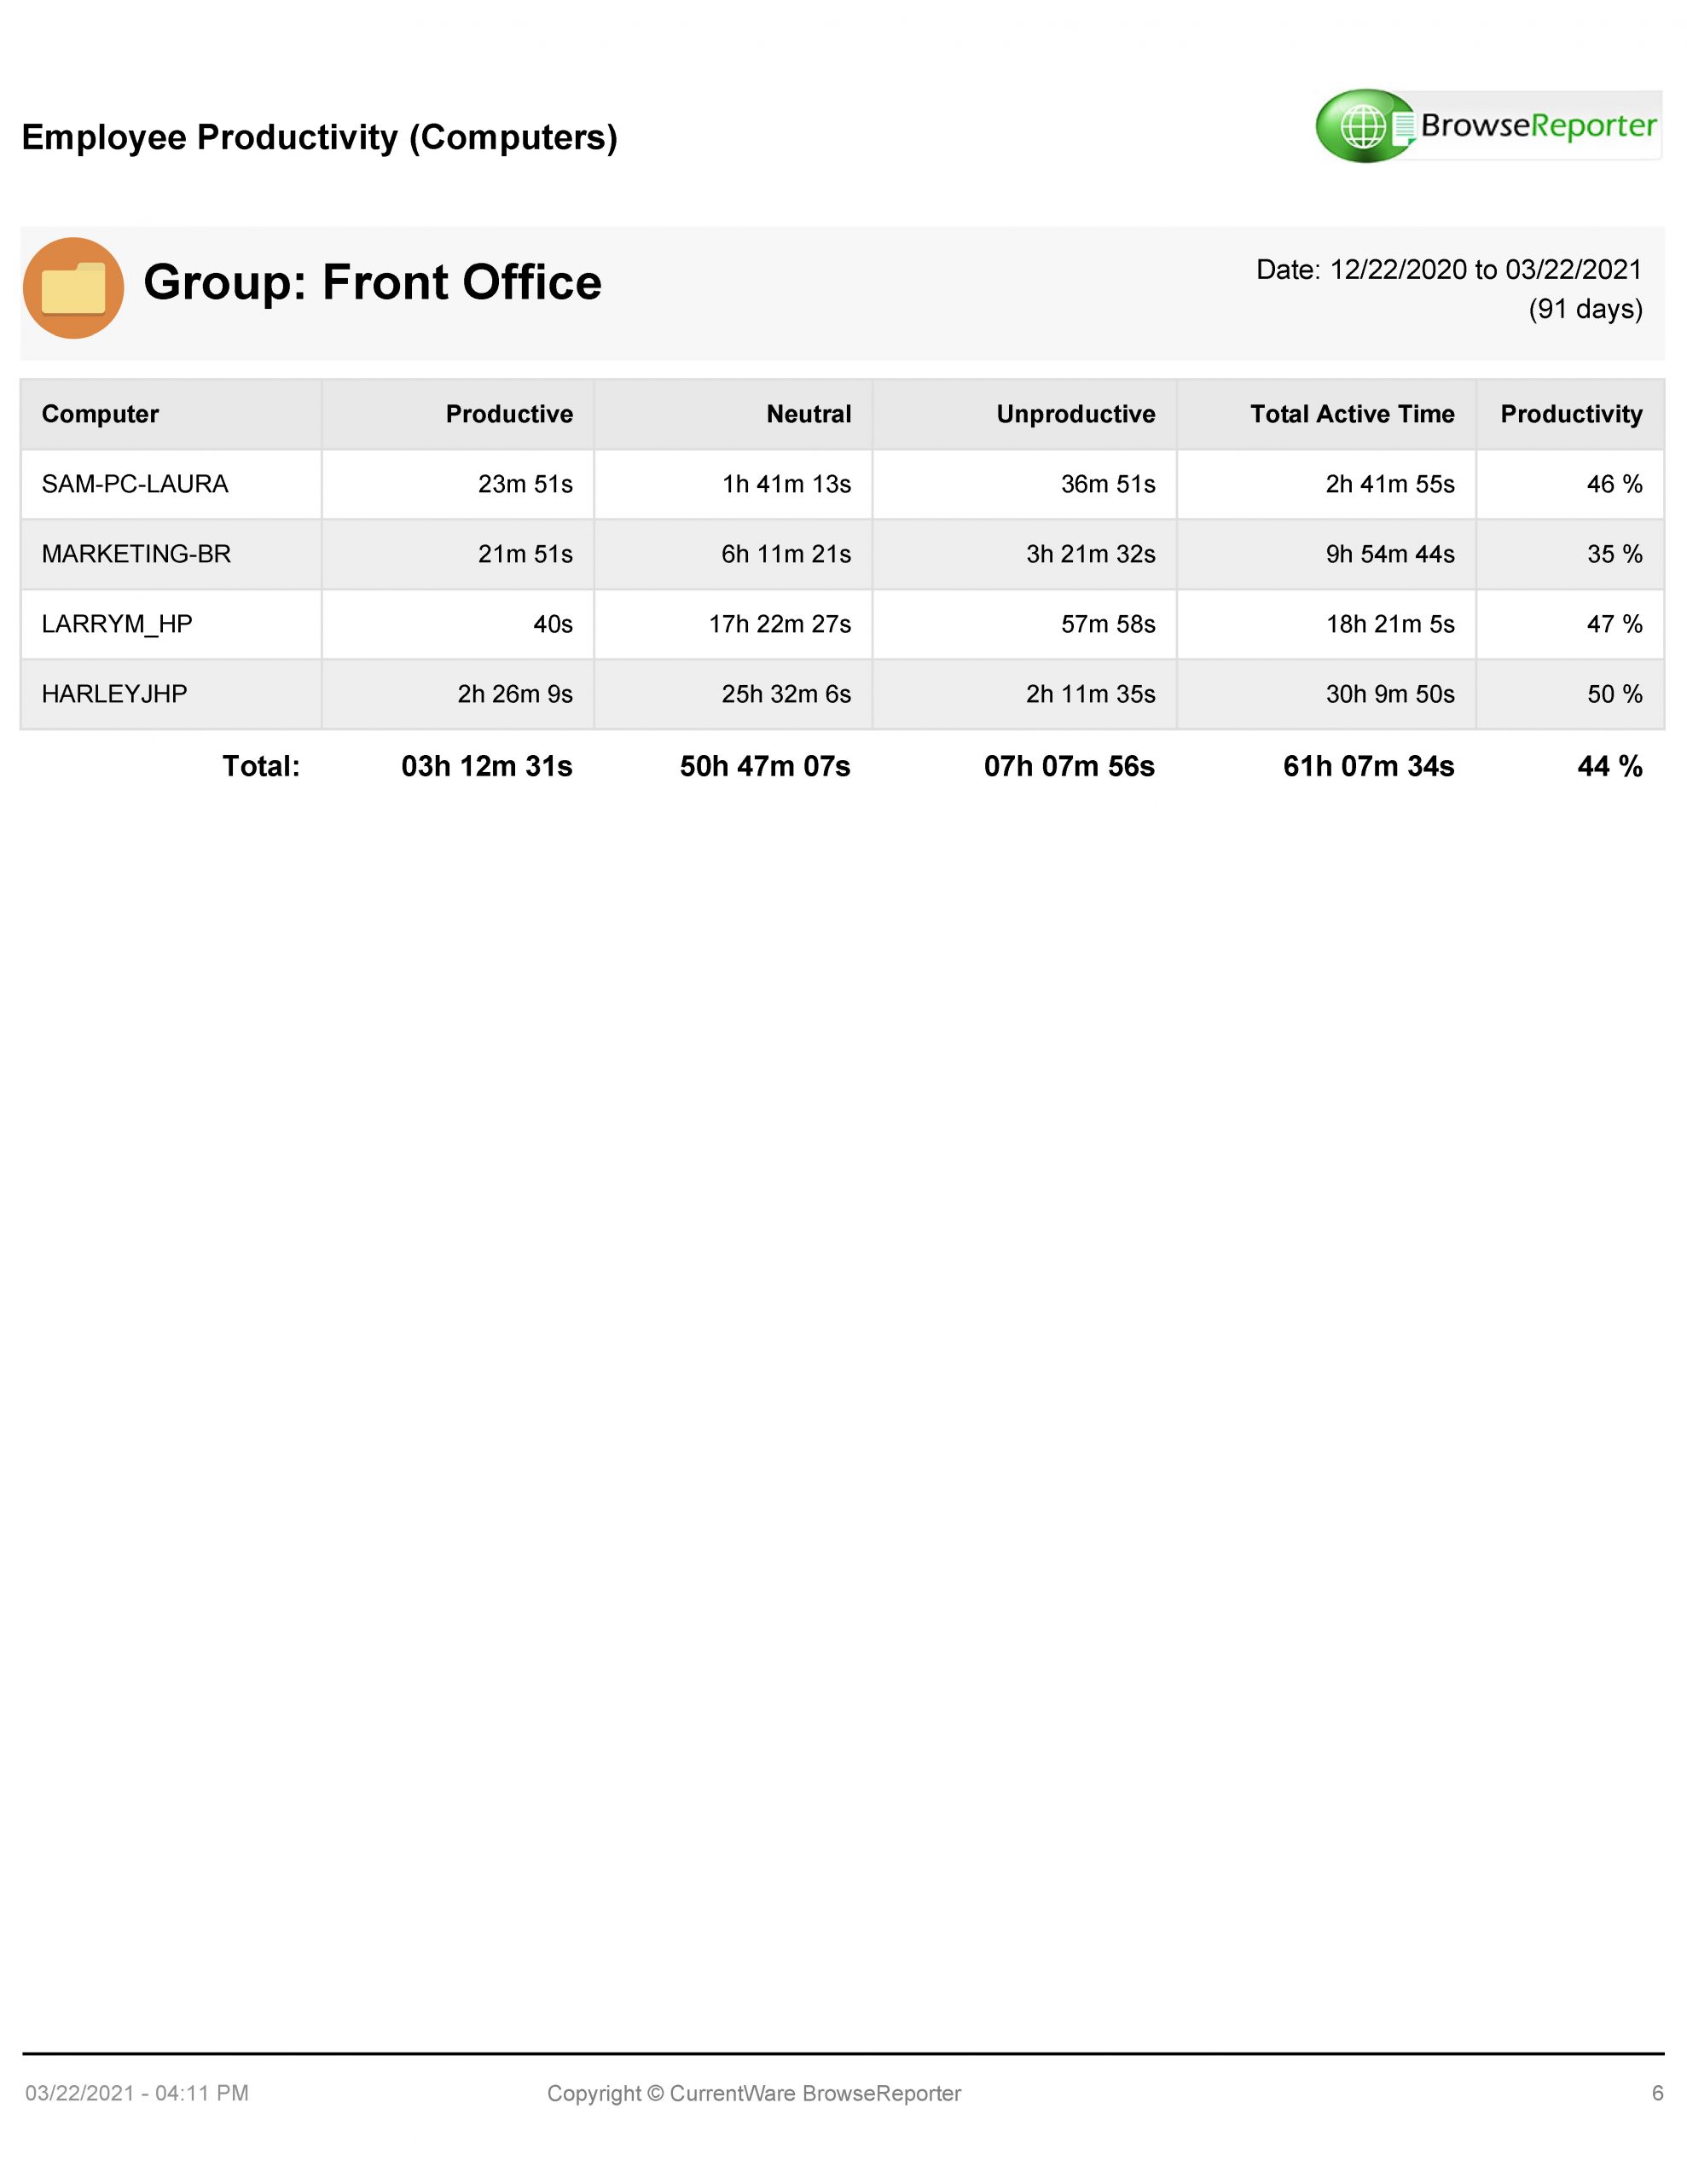 BrowseReporter group summary report for front office employee productivity